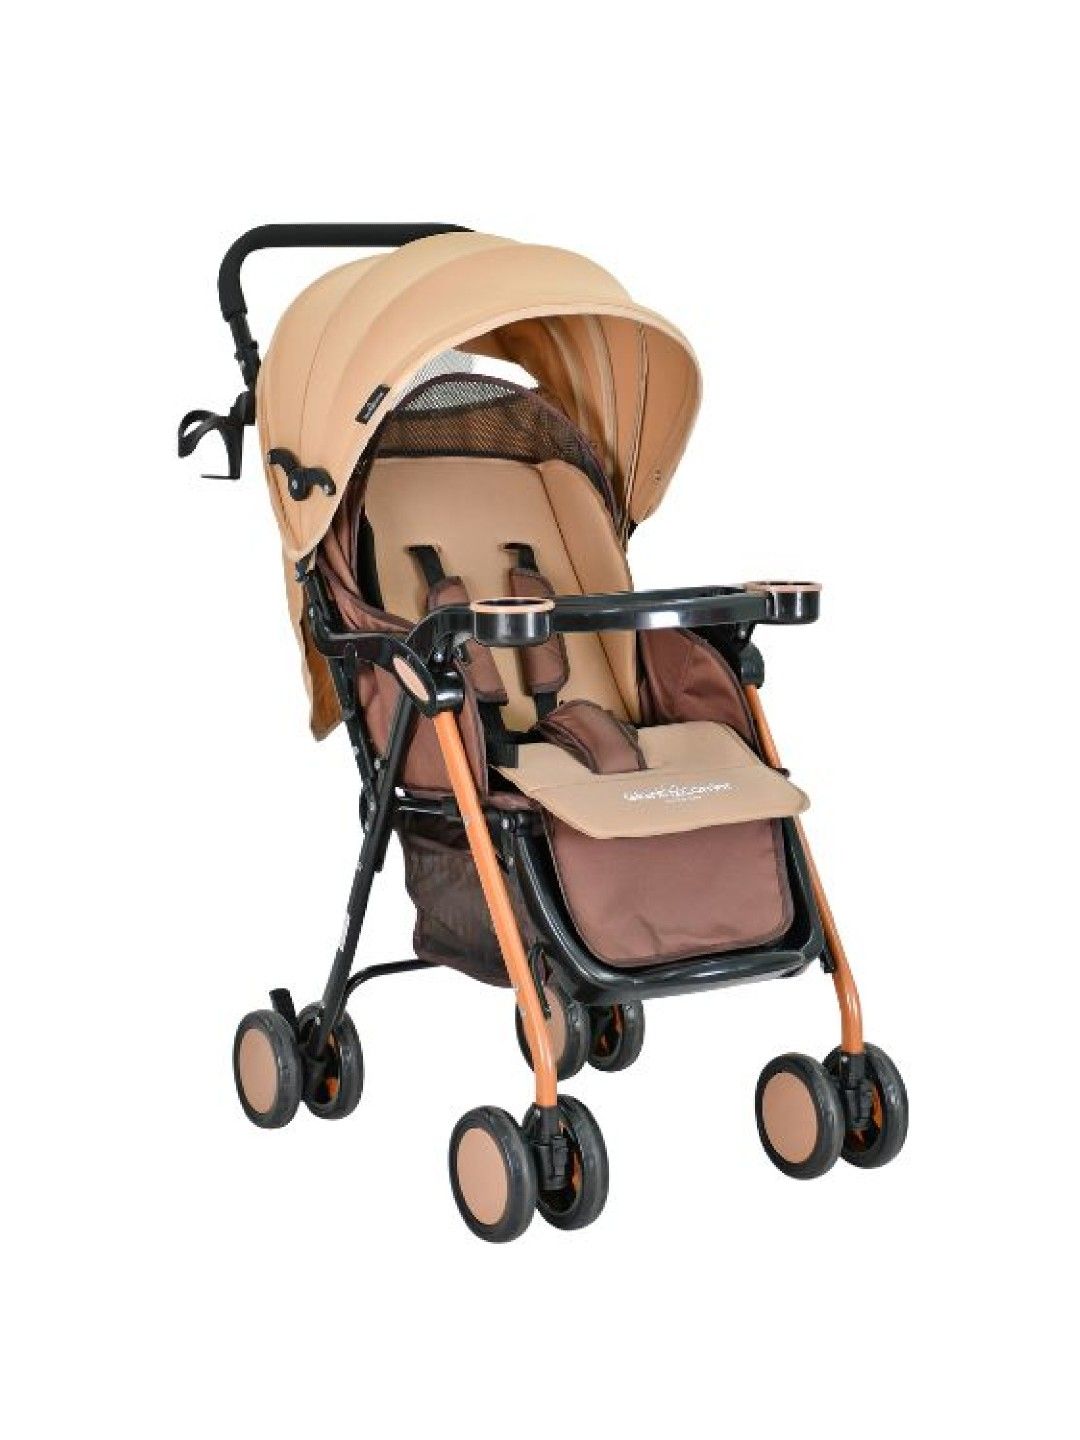 Giant Carrier Darcy Stroller